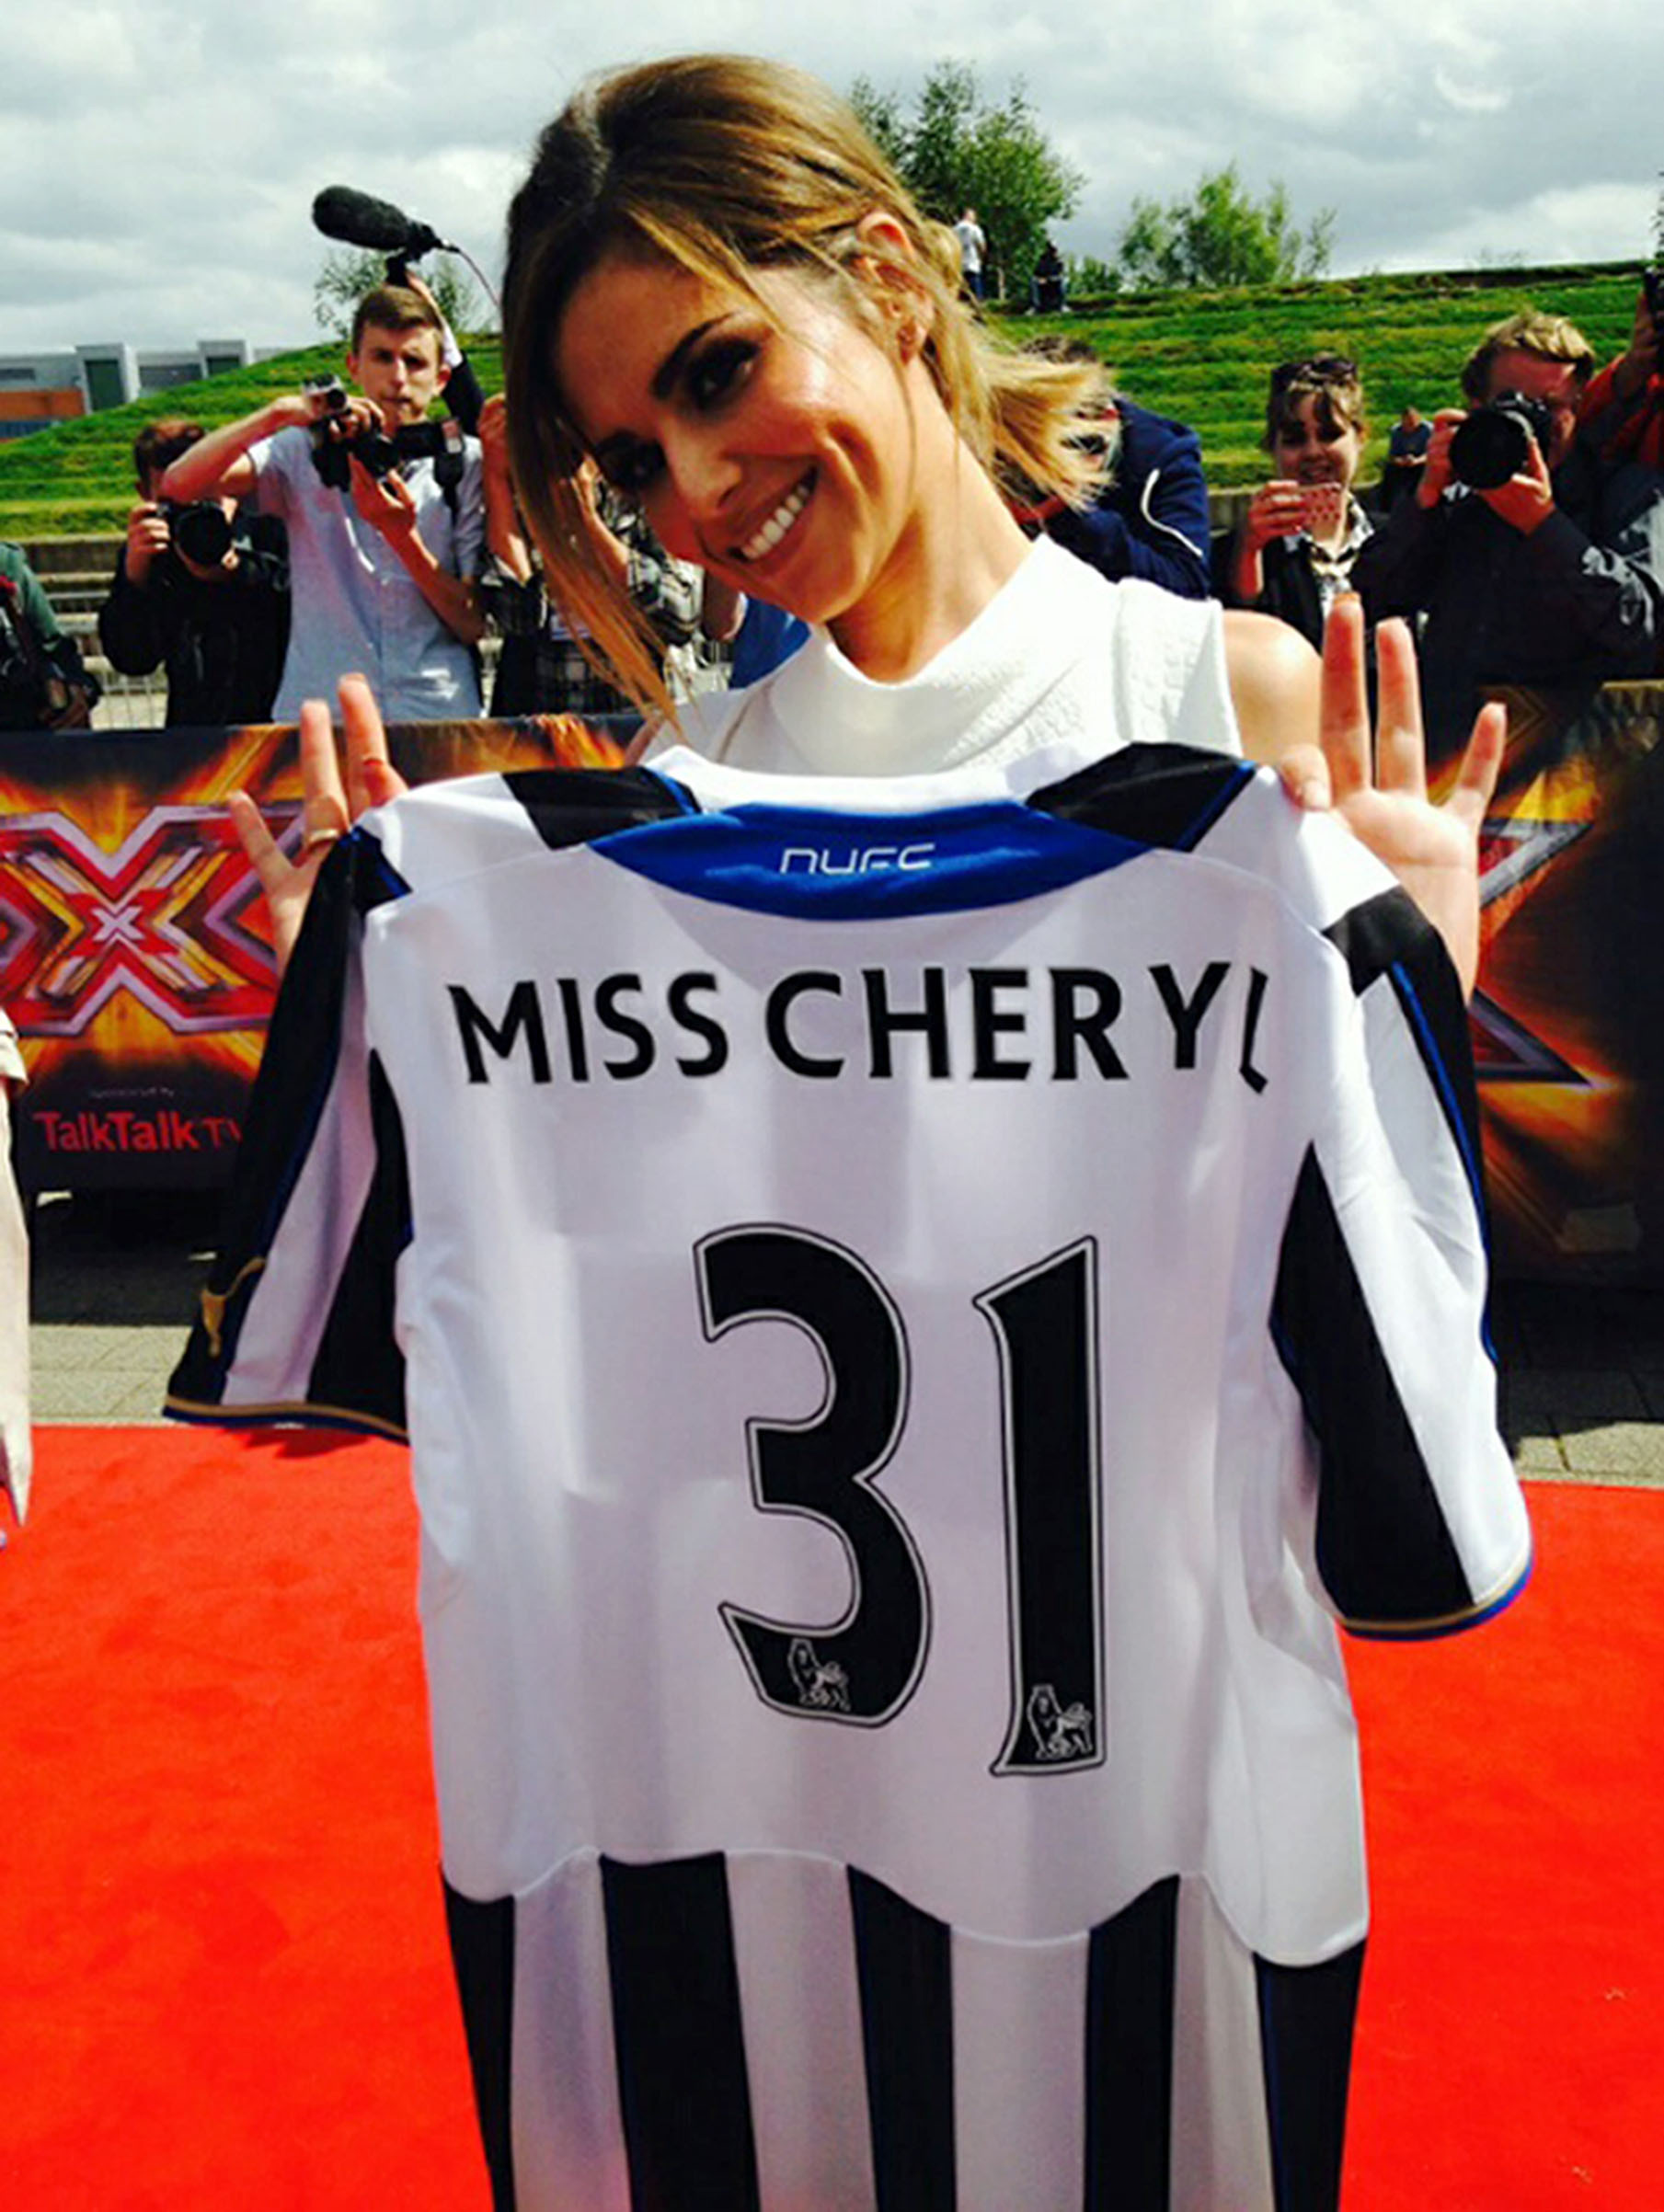 Cheryl Cole given a football short by fans